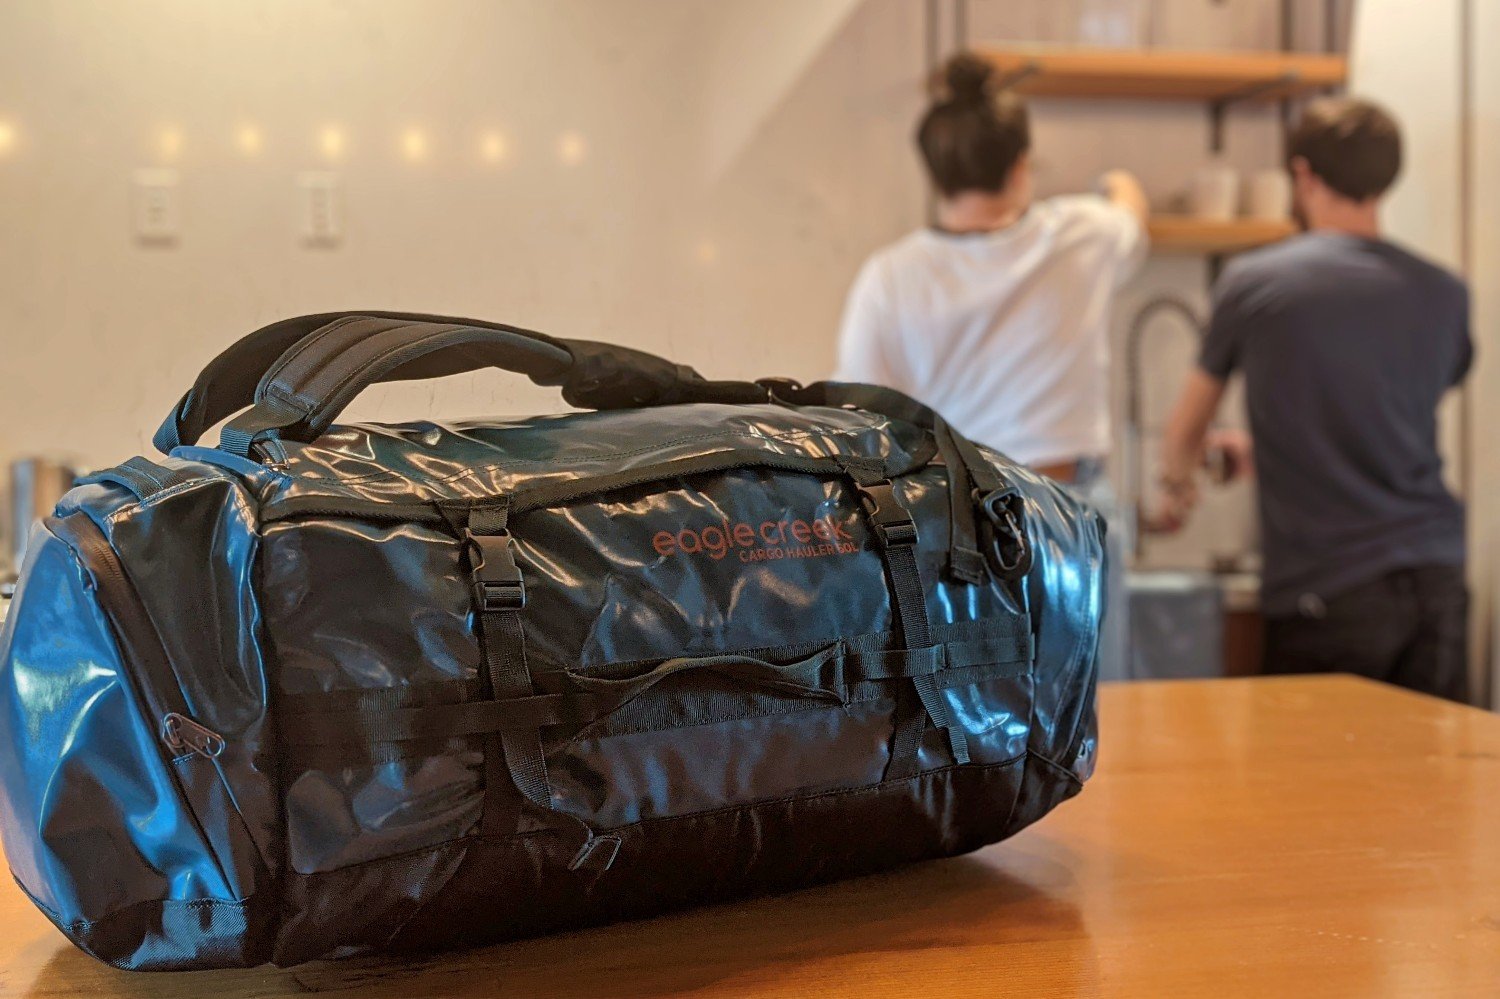 The Eagle Creek Cargo hauler duffel sitting on a counter of a kitchen with two people in the background